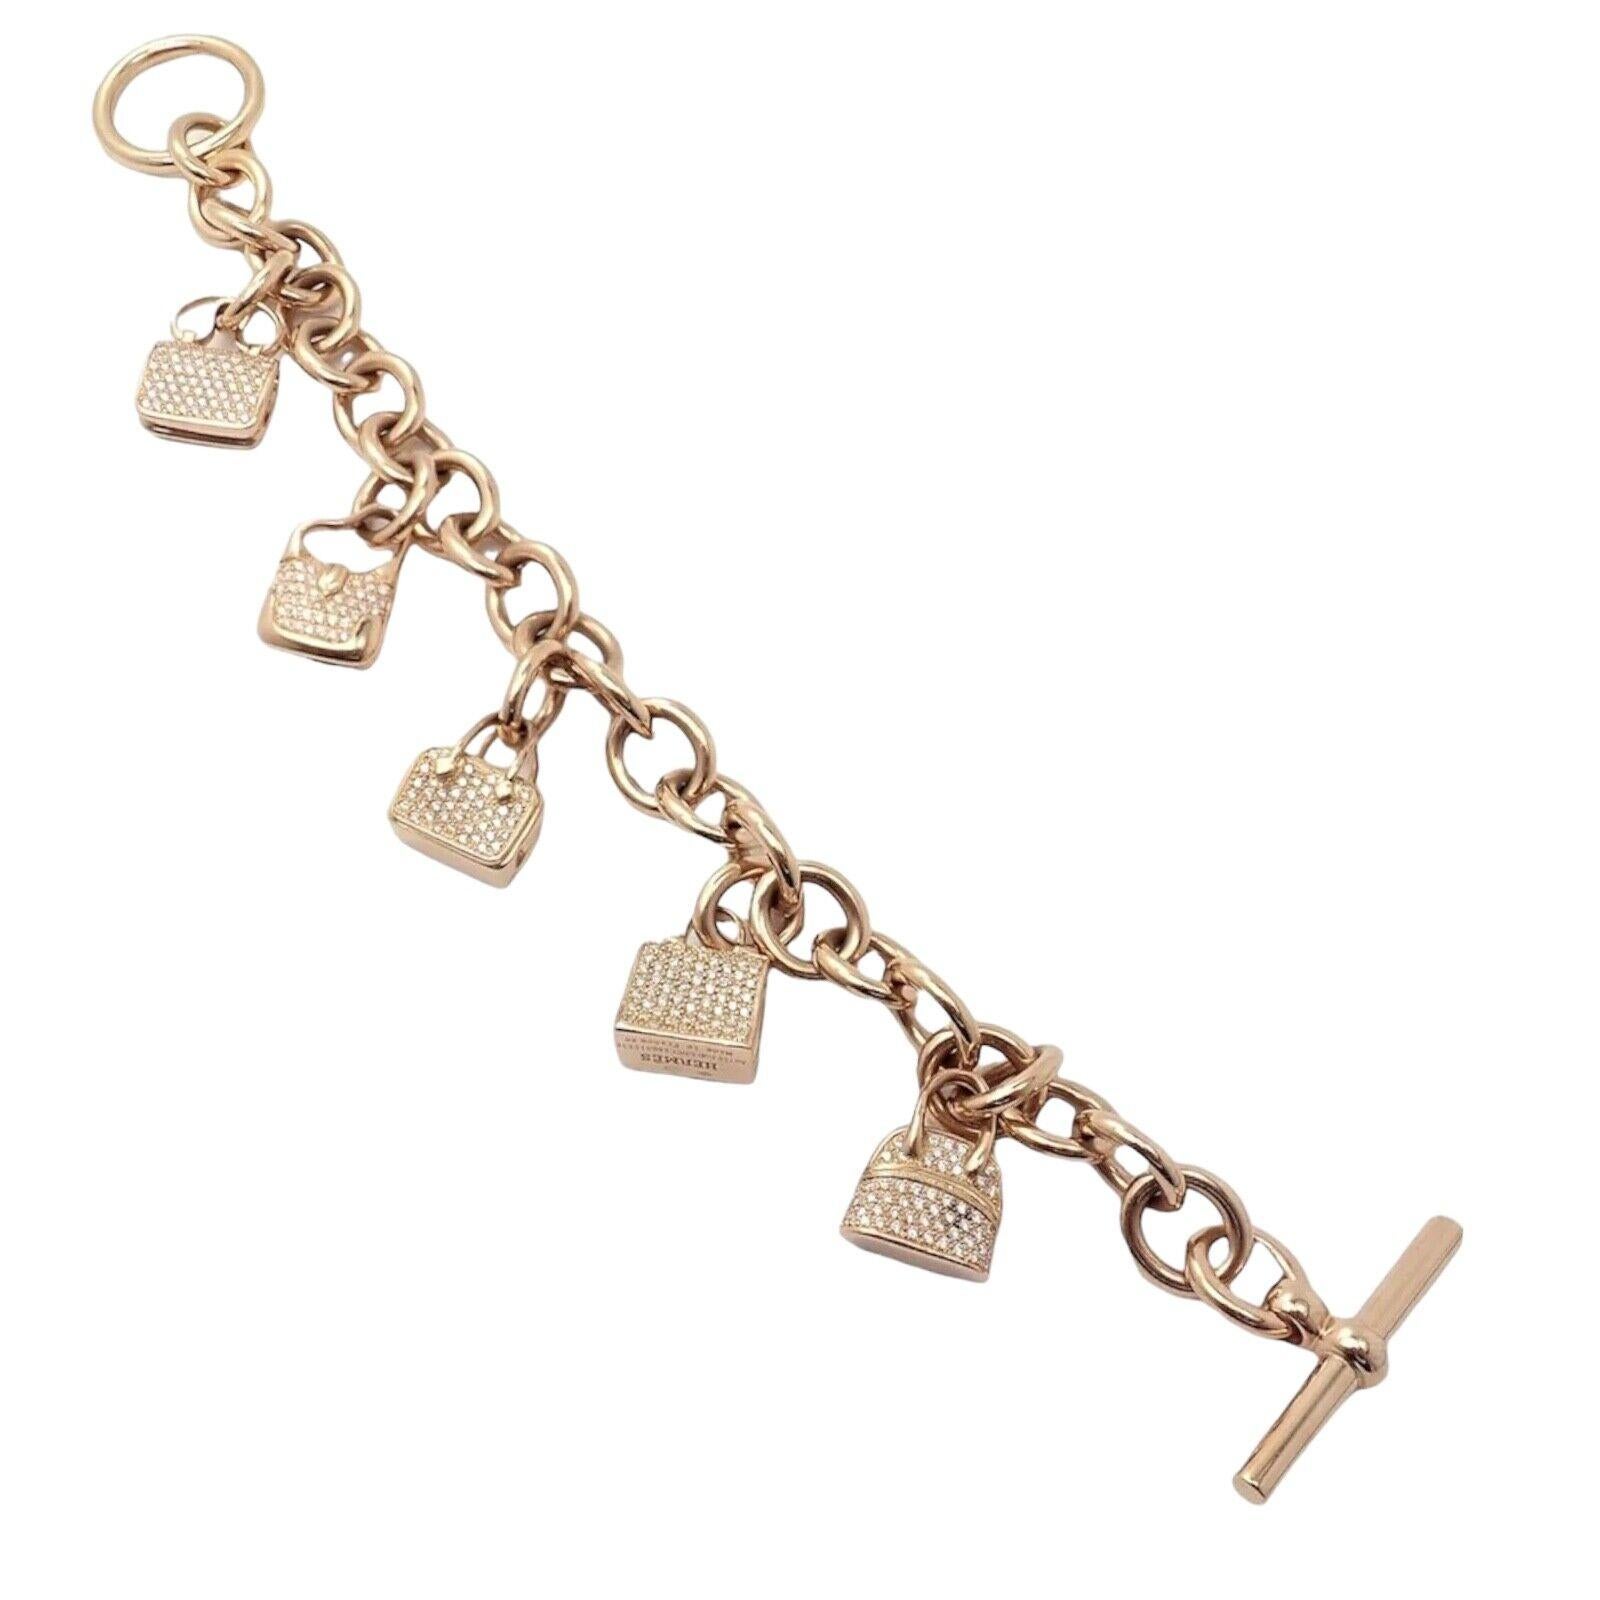 18k Rose Gold Diamond Signature Iconic Hanging Bag Charms Link Bracelet by Hermes. 
Includes a total of 4 Hermes bag charms: 
With 510 Brilliant Cut Diamonds VVS1 clarity, E color total weight approximately 1.97ct
5 diamond iconic bag charms: